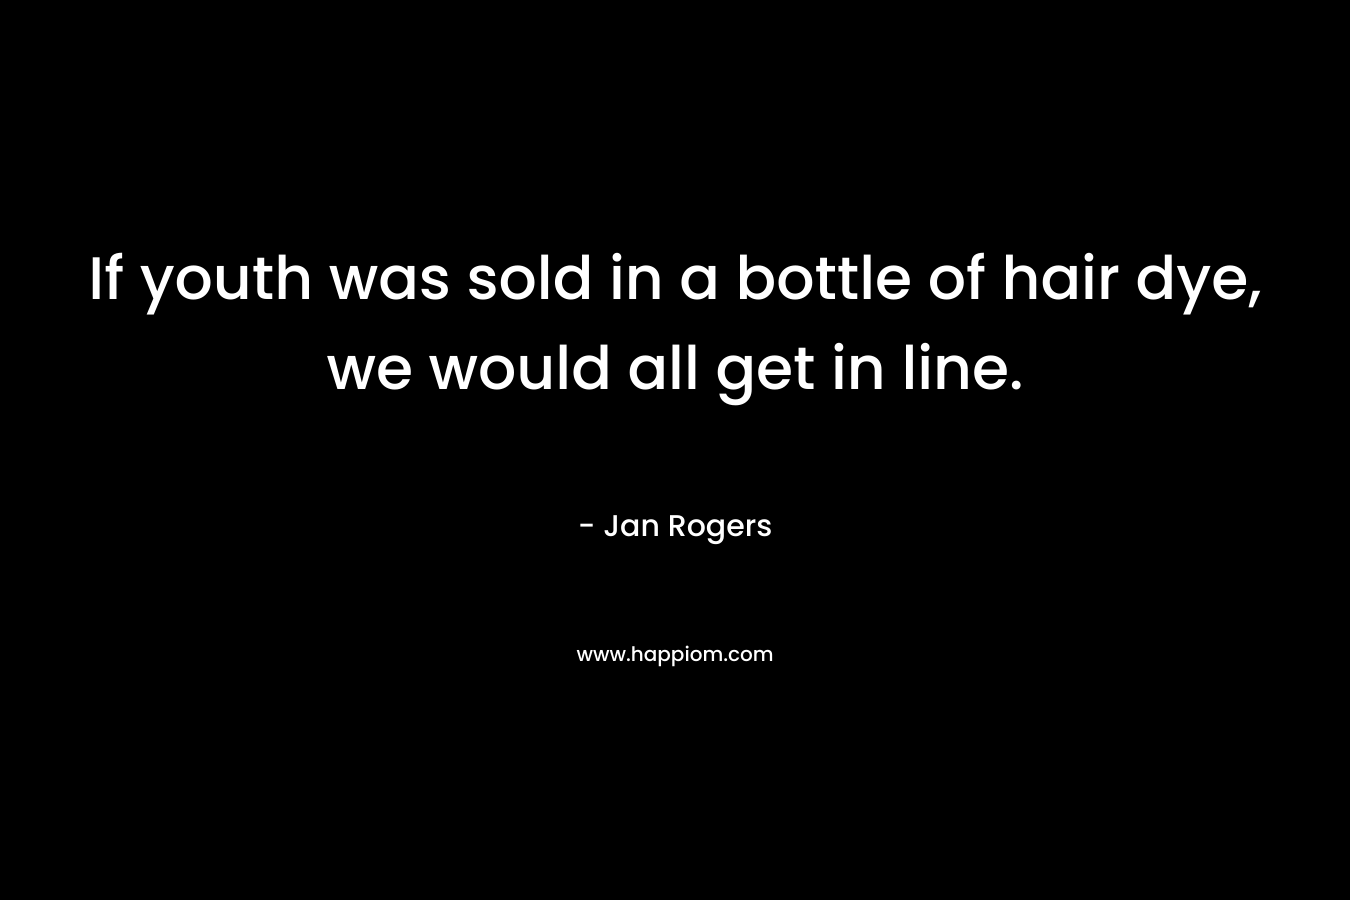 If youth was sold in a bottle of hair dye, we would all get in line. – Jan Rogers